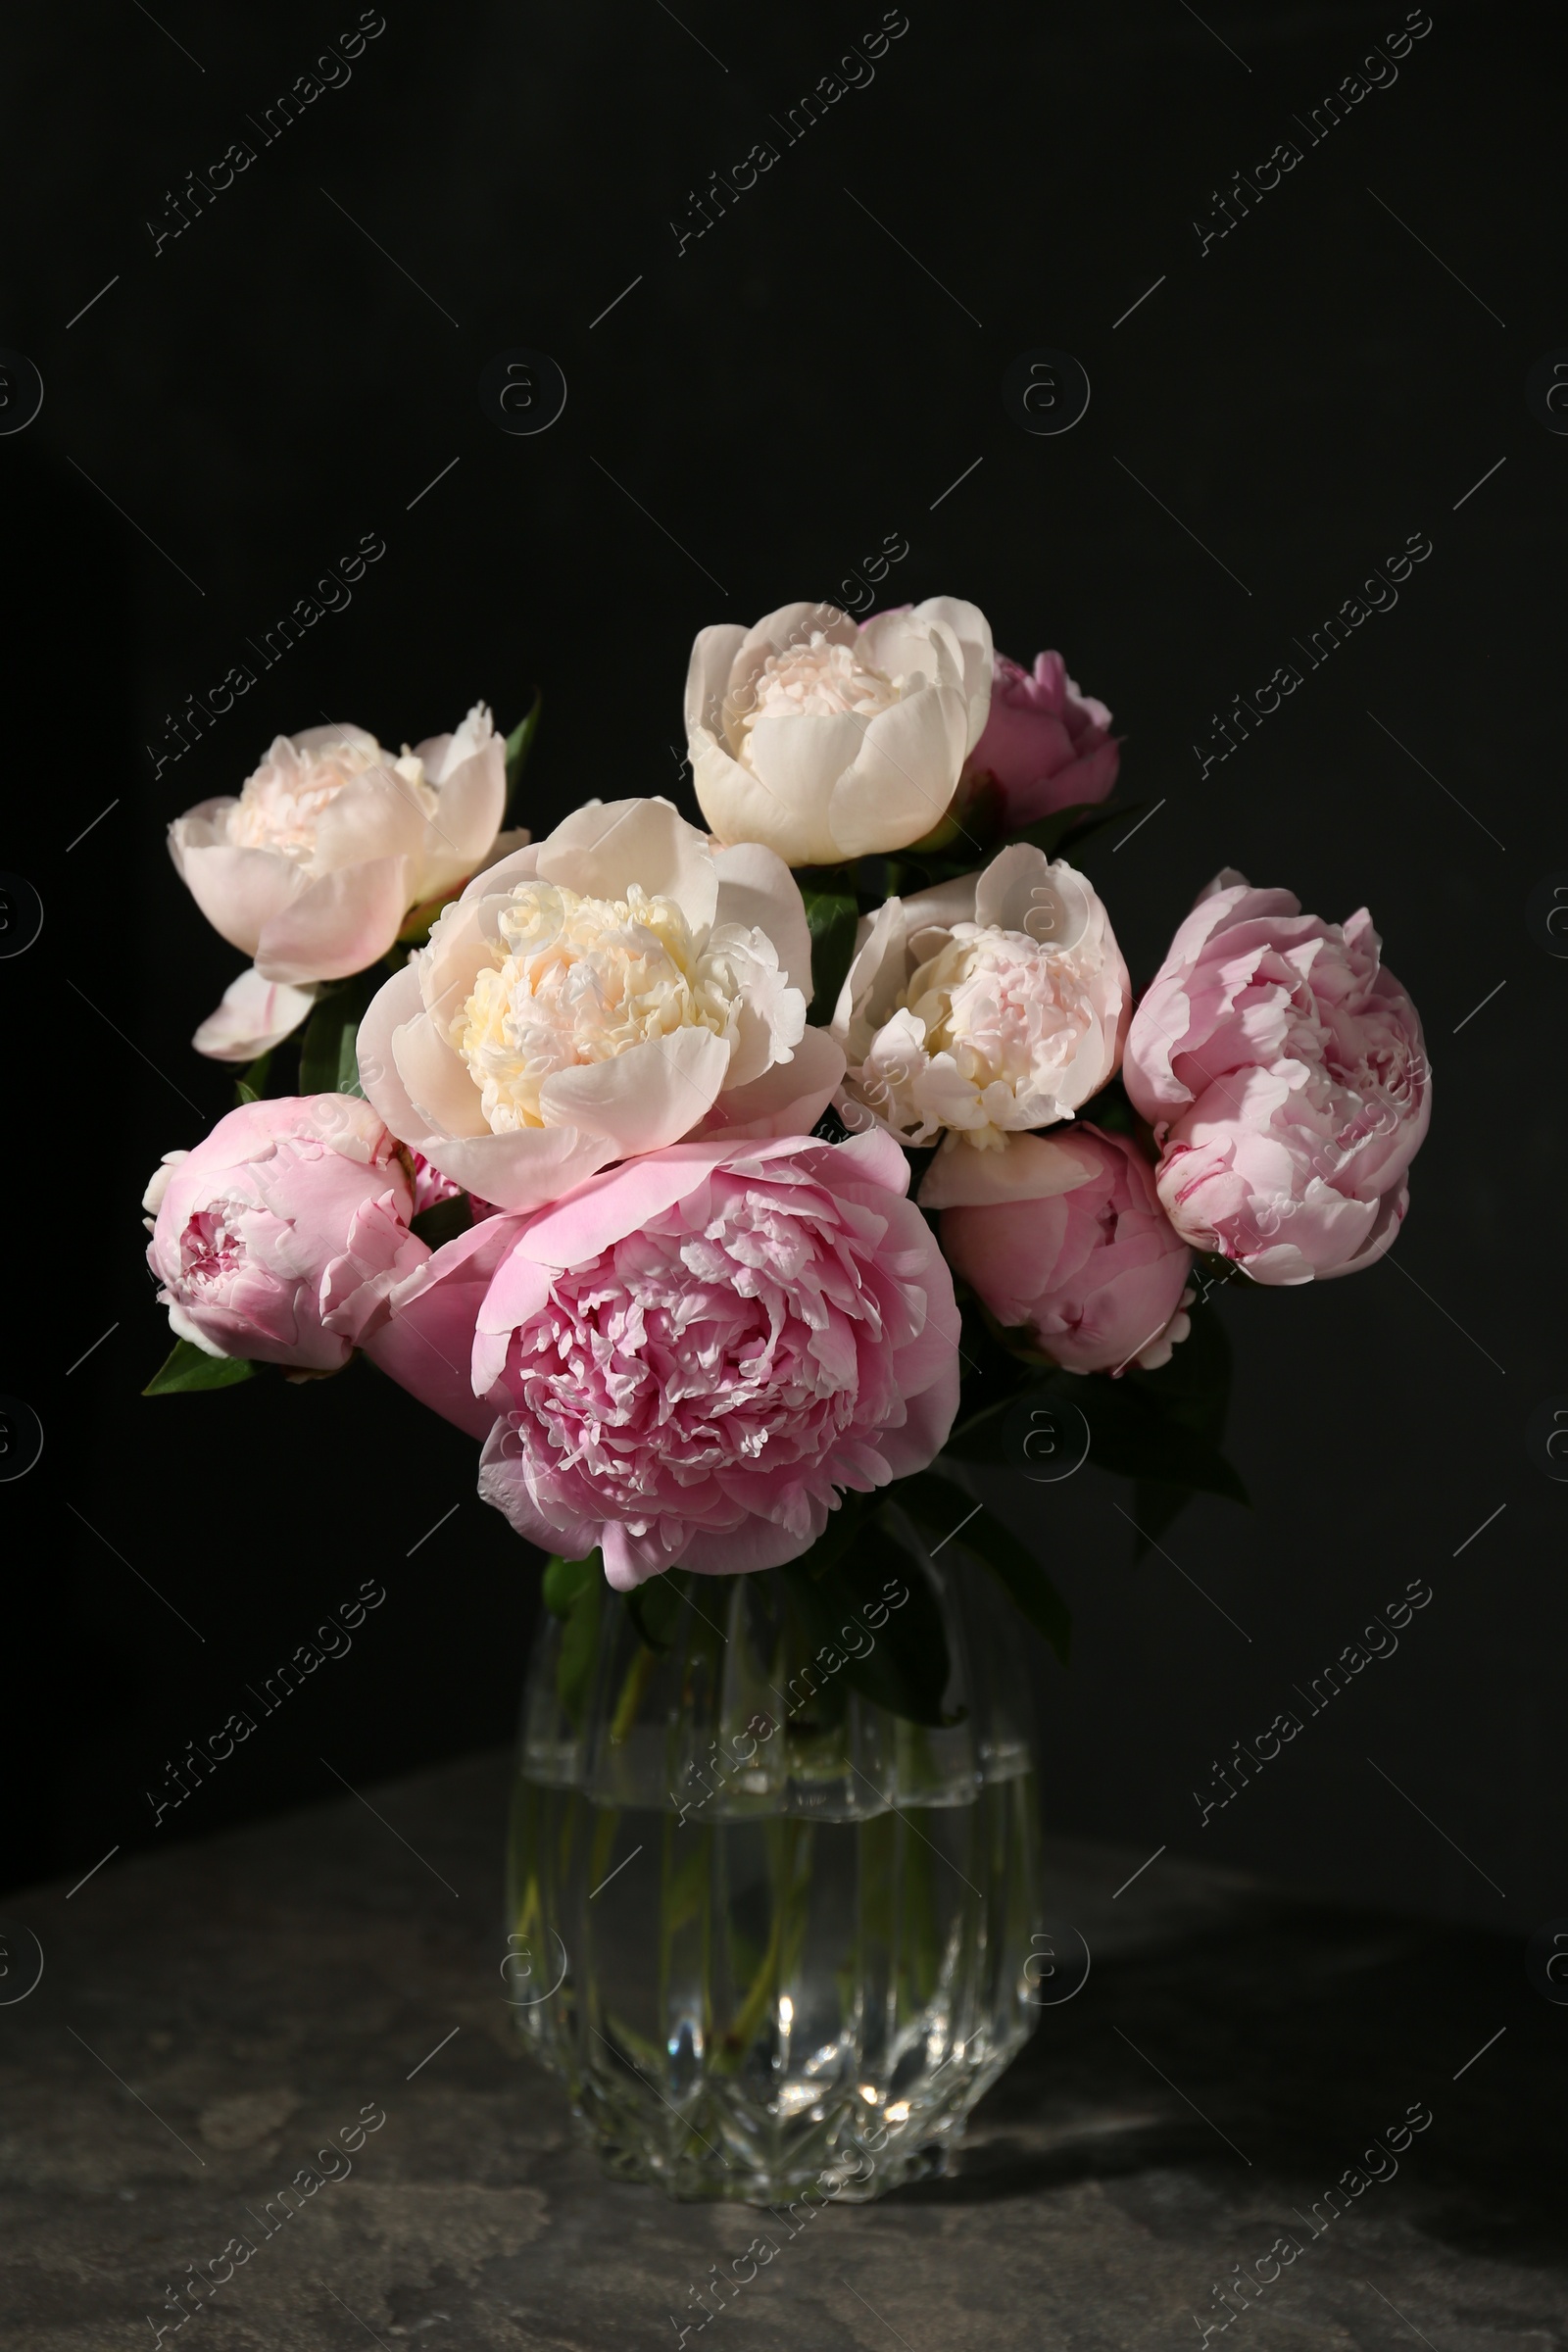 Photo of Bouquet of beautiful peonies in glass vase on dark table against black background